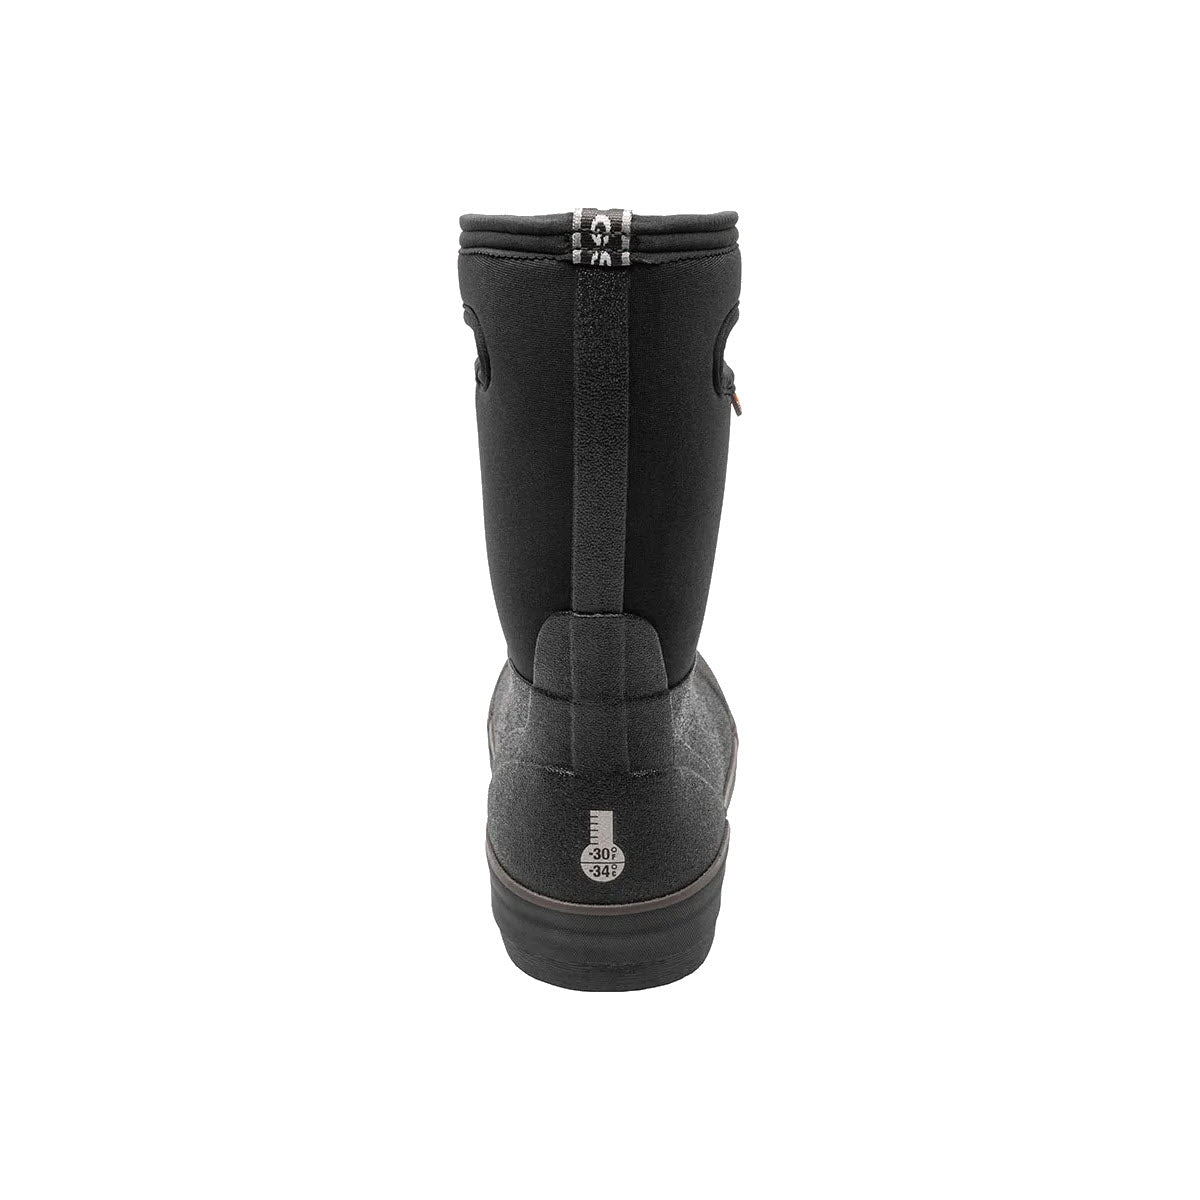 A rear view of a single black Bogs Classic II Solid Black - Kids winter boot with a zipper and 100% waterproof Neo-Tech insulation.